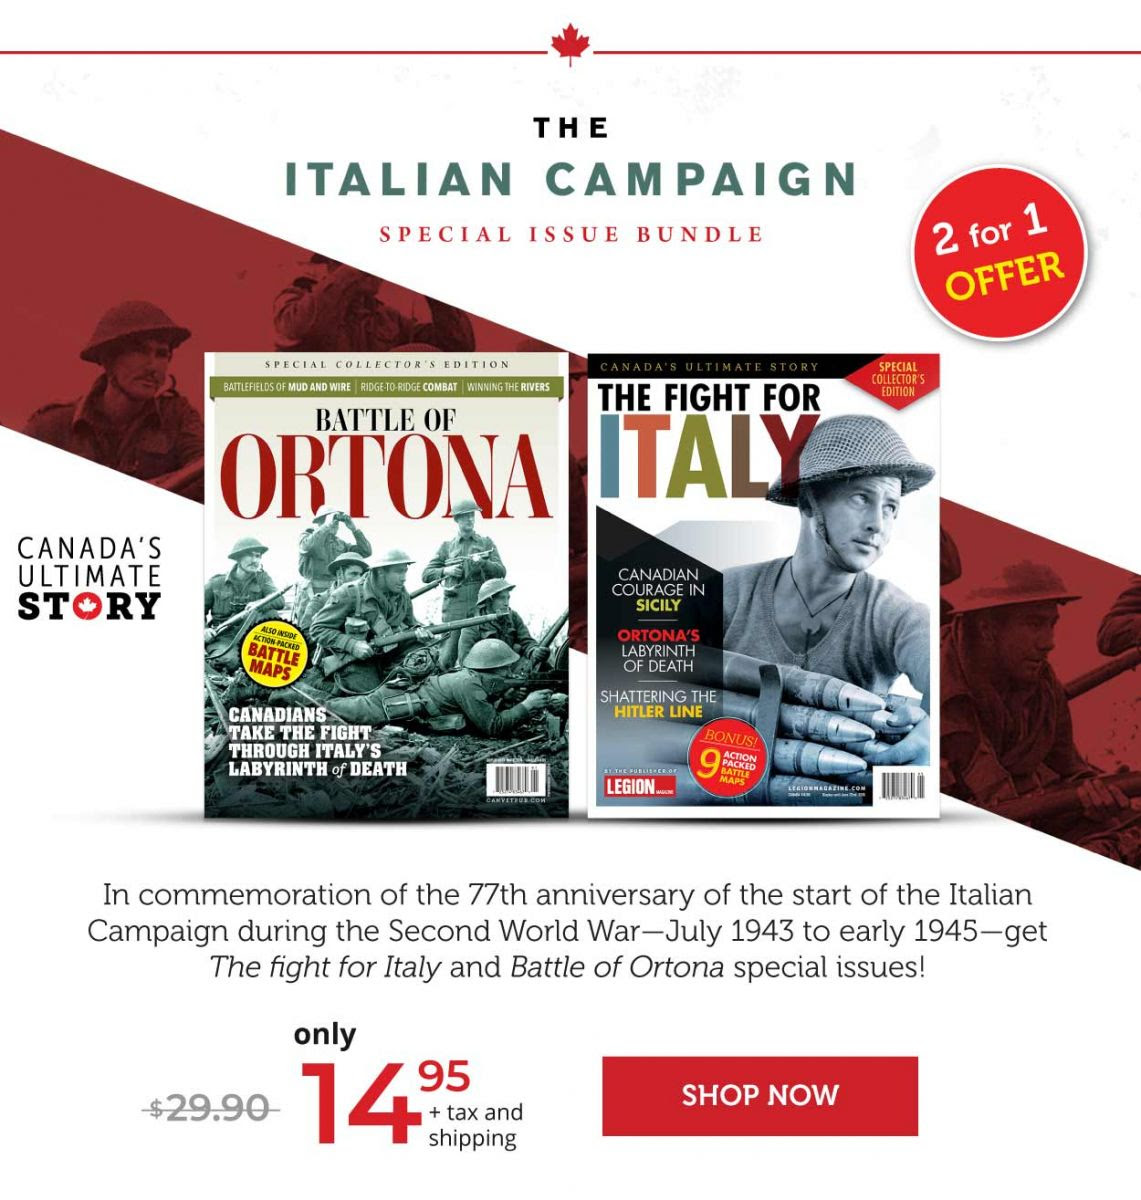 The Italian Campaign Special Issue Bundle